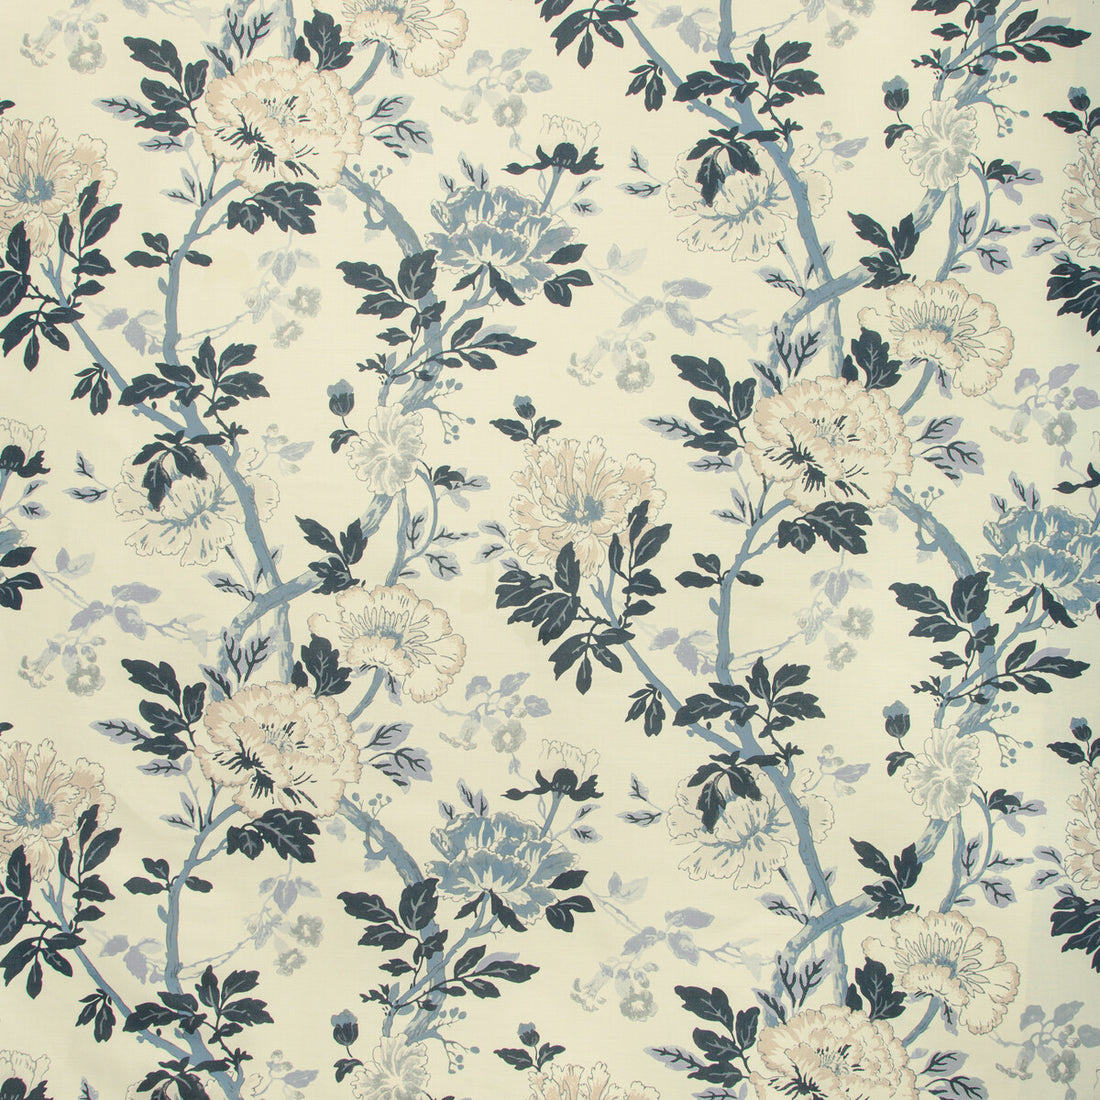 Inisfree fabric in denim color - pattern 2019149.505.0 - by Lee Jofa in the Carrier And Company collection